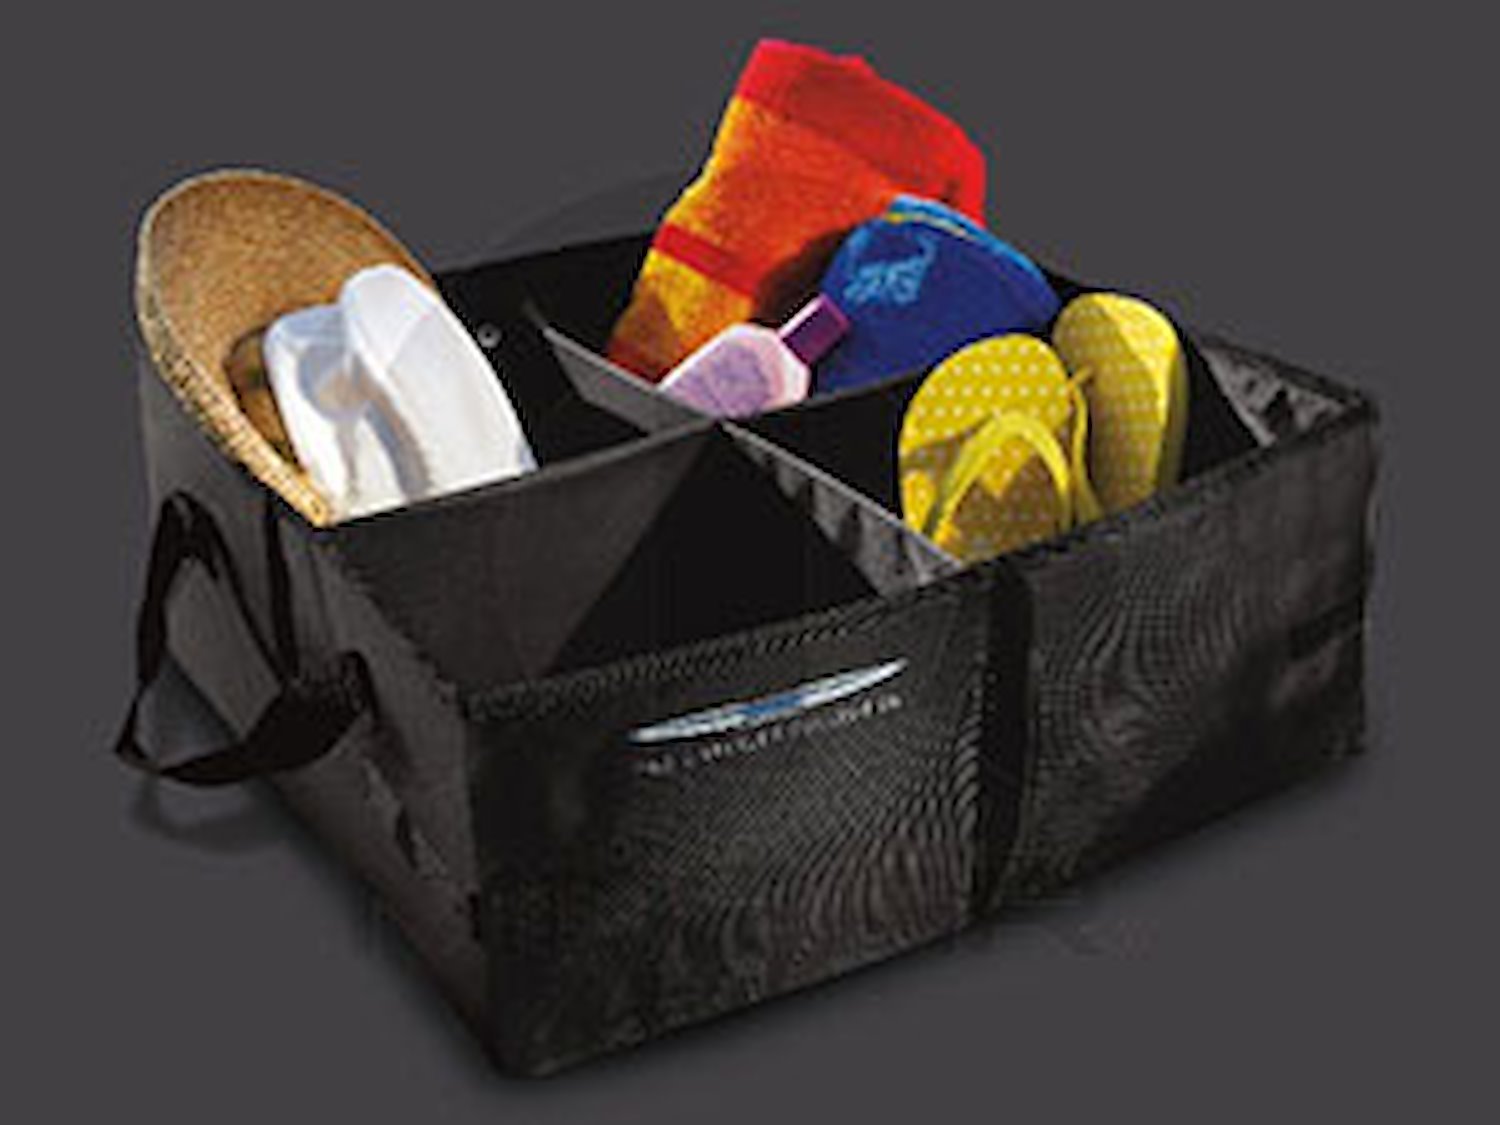 Collapsible Cargo Tote 2001-13 Chrysler Vehicles